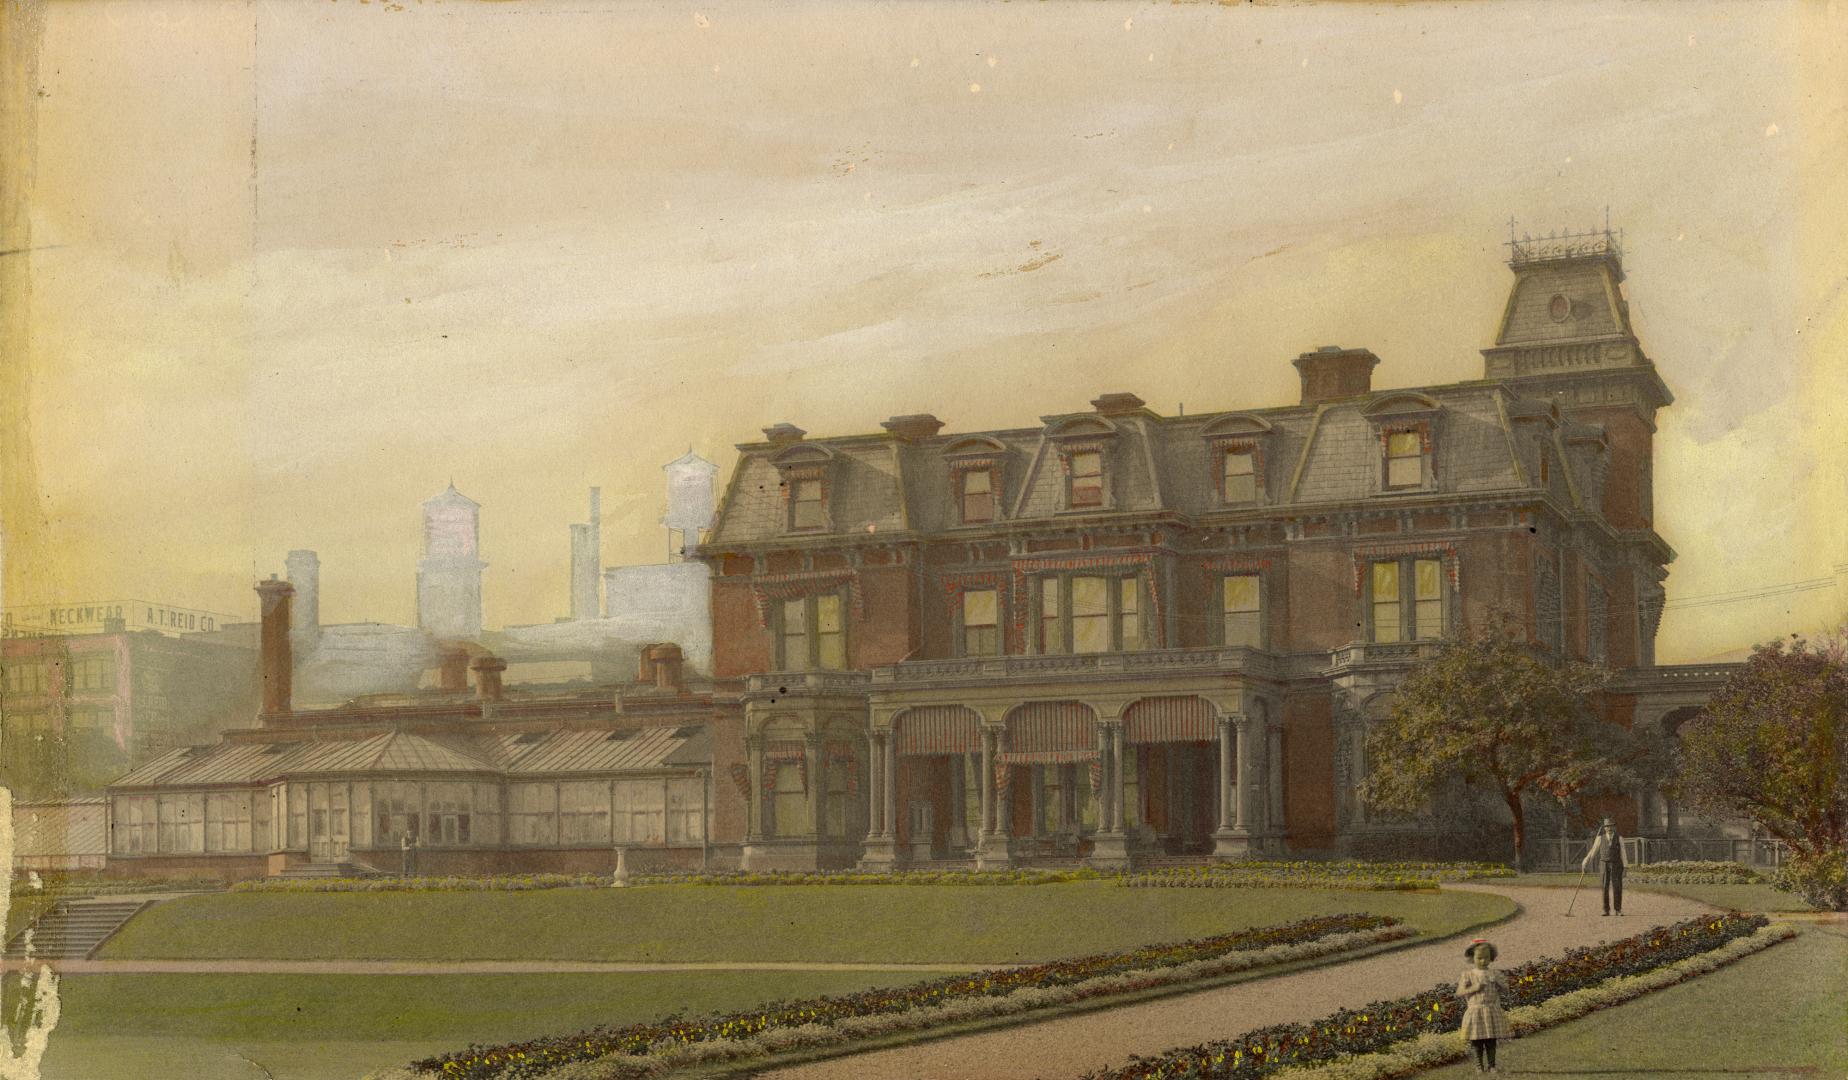 Government House (1868-1912), looking northwest